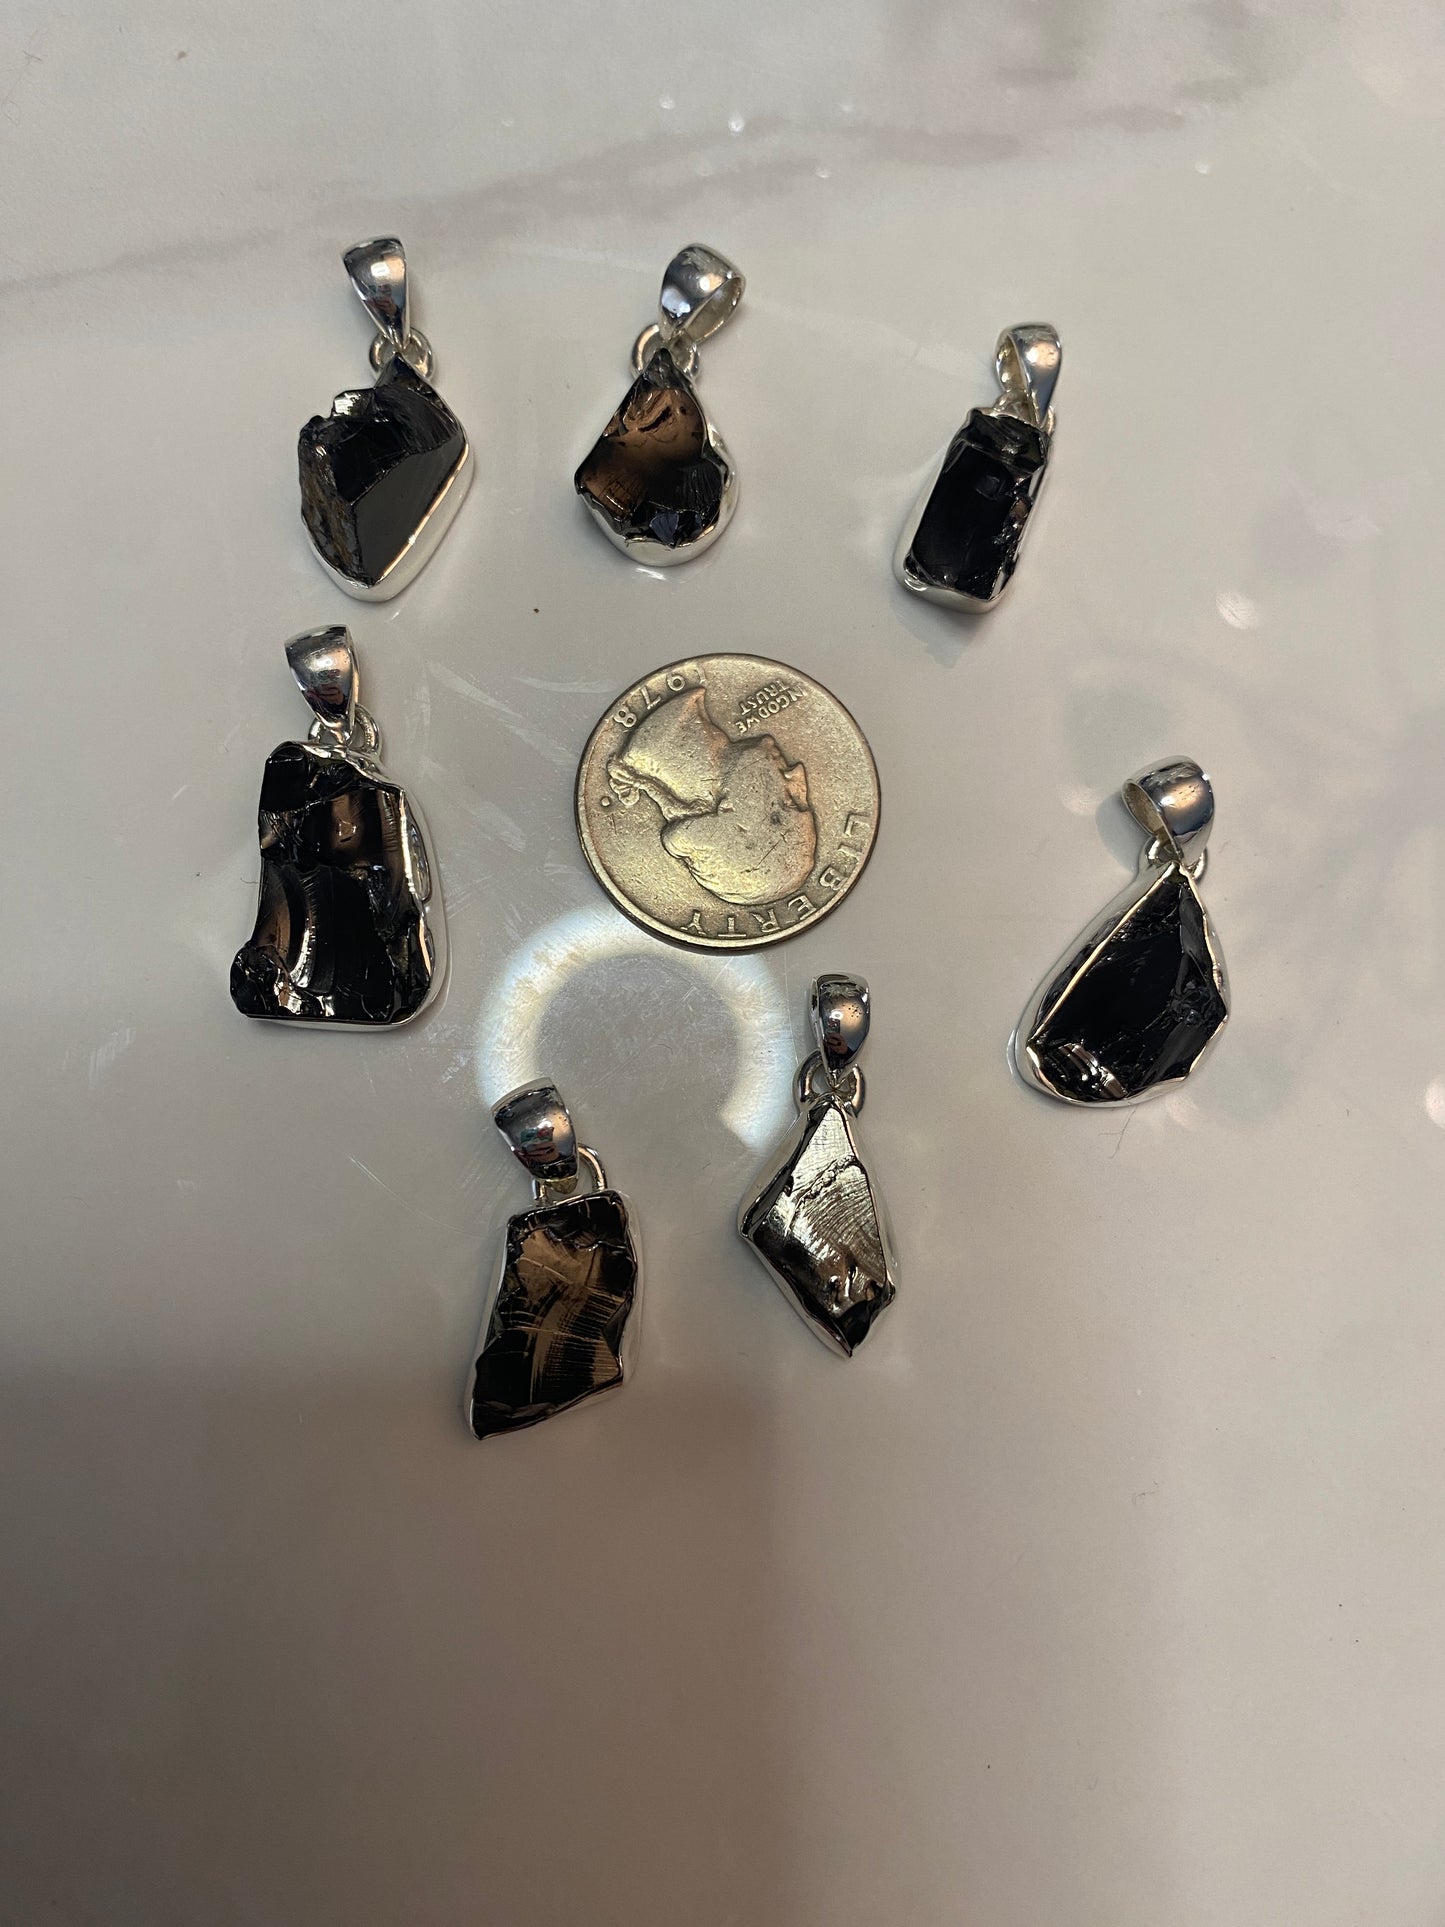 Elite Shungite Pendant - set in Sterling Silver with Sterling Silver Bail